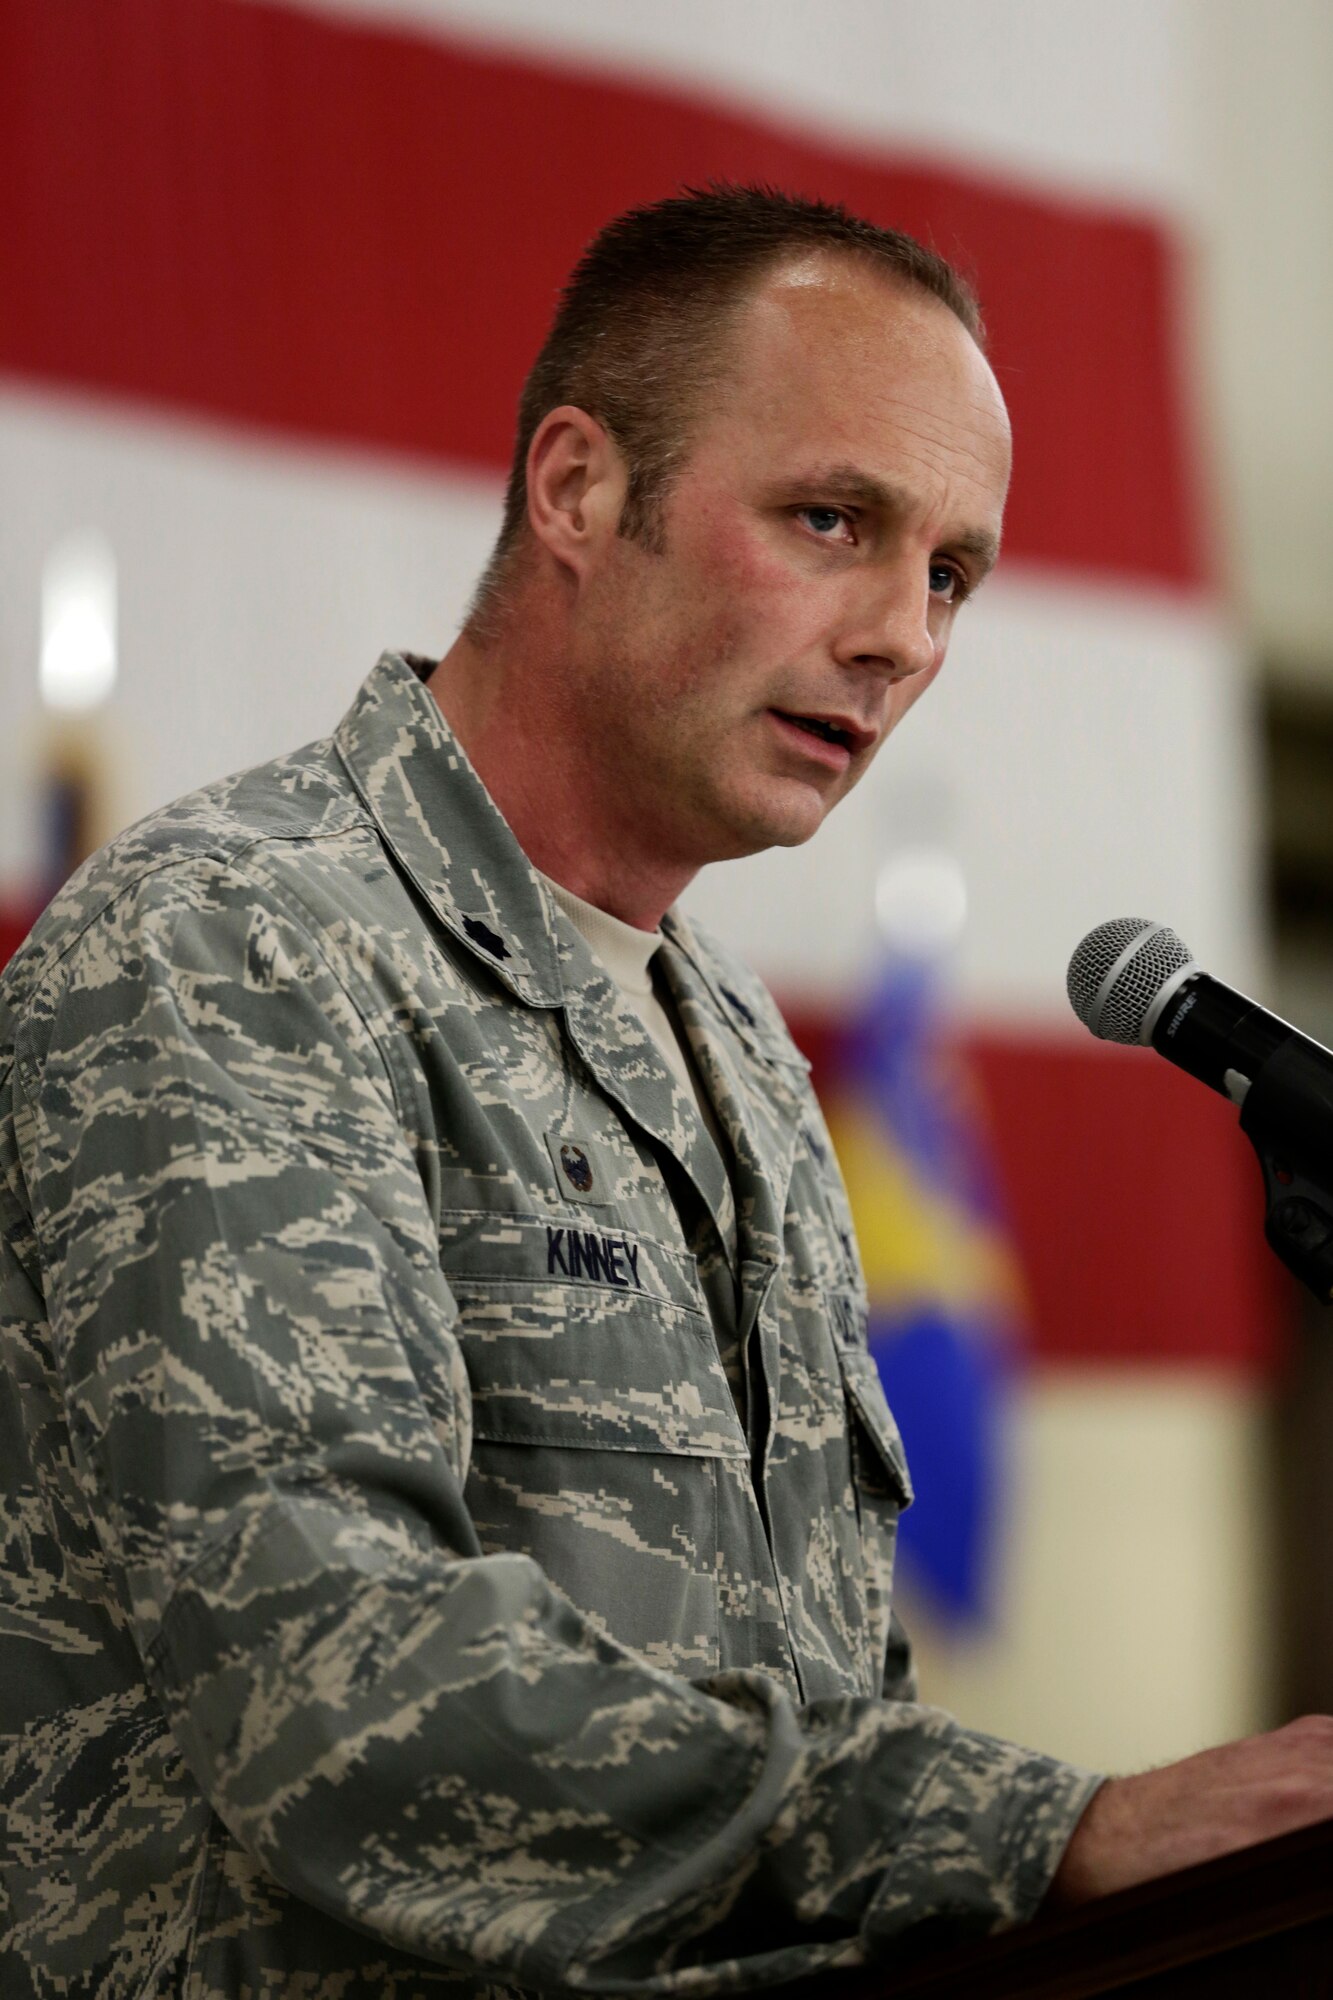 Lt. Col. Robert Kinney, 188th Intelligence, Surveillance and Reconnaissance Group commander, speaks to a packed hangar during a Conversion Day ceremony held at Ebbing Air National Guard Base, Fort Smith, Arkansas, June 7, 2014.  Kinney took command of the newly activated 188th ISR Group during the ceremony, which recognized the many changes occurring at the wing as a result of its conversion to a remotely piloted aircraft (MQ-9 Reapers) and intelligence, surveillance and reconnaissance mission. The 188th Fighter Wing was redesignated as the 188th Wing during the event. (U.S. Air National Guard photo by Master Sgt. Mark Moore)